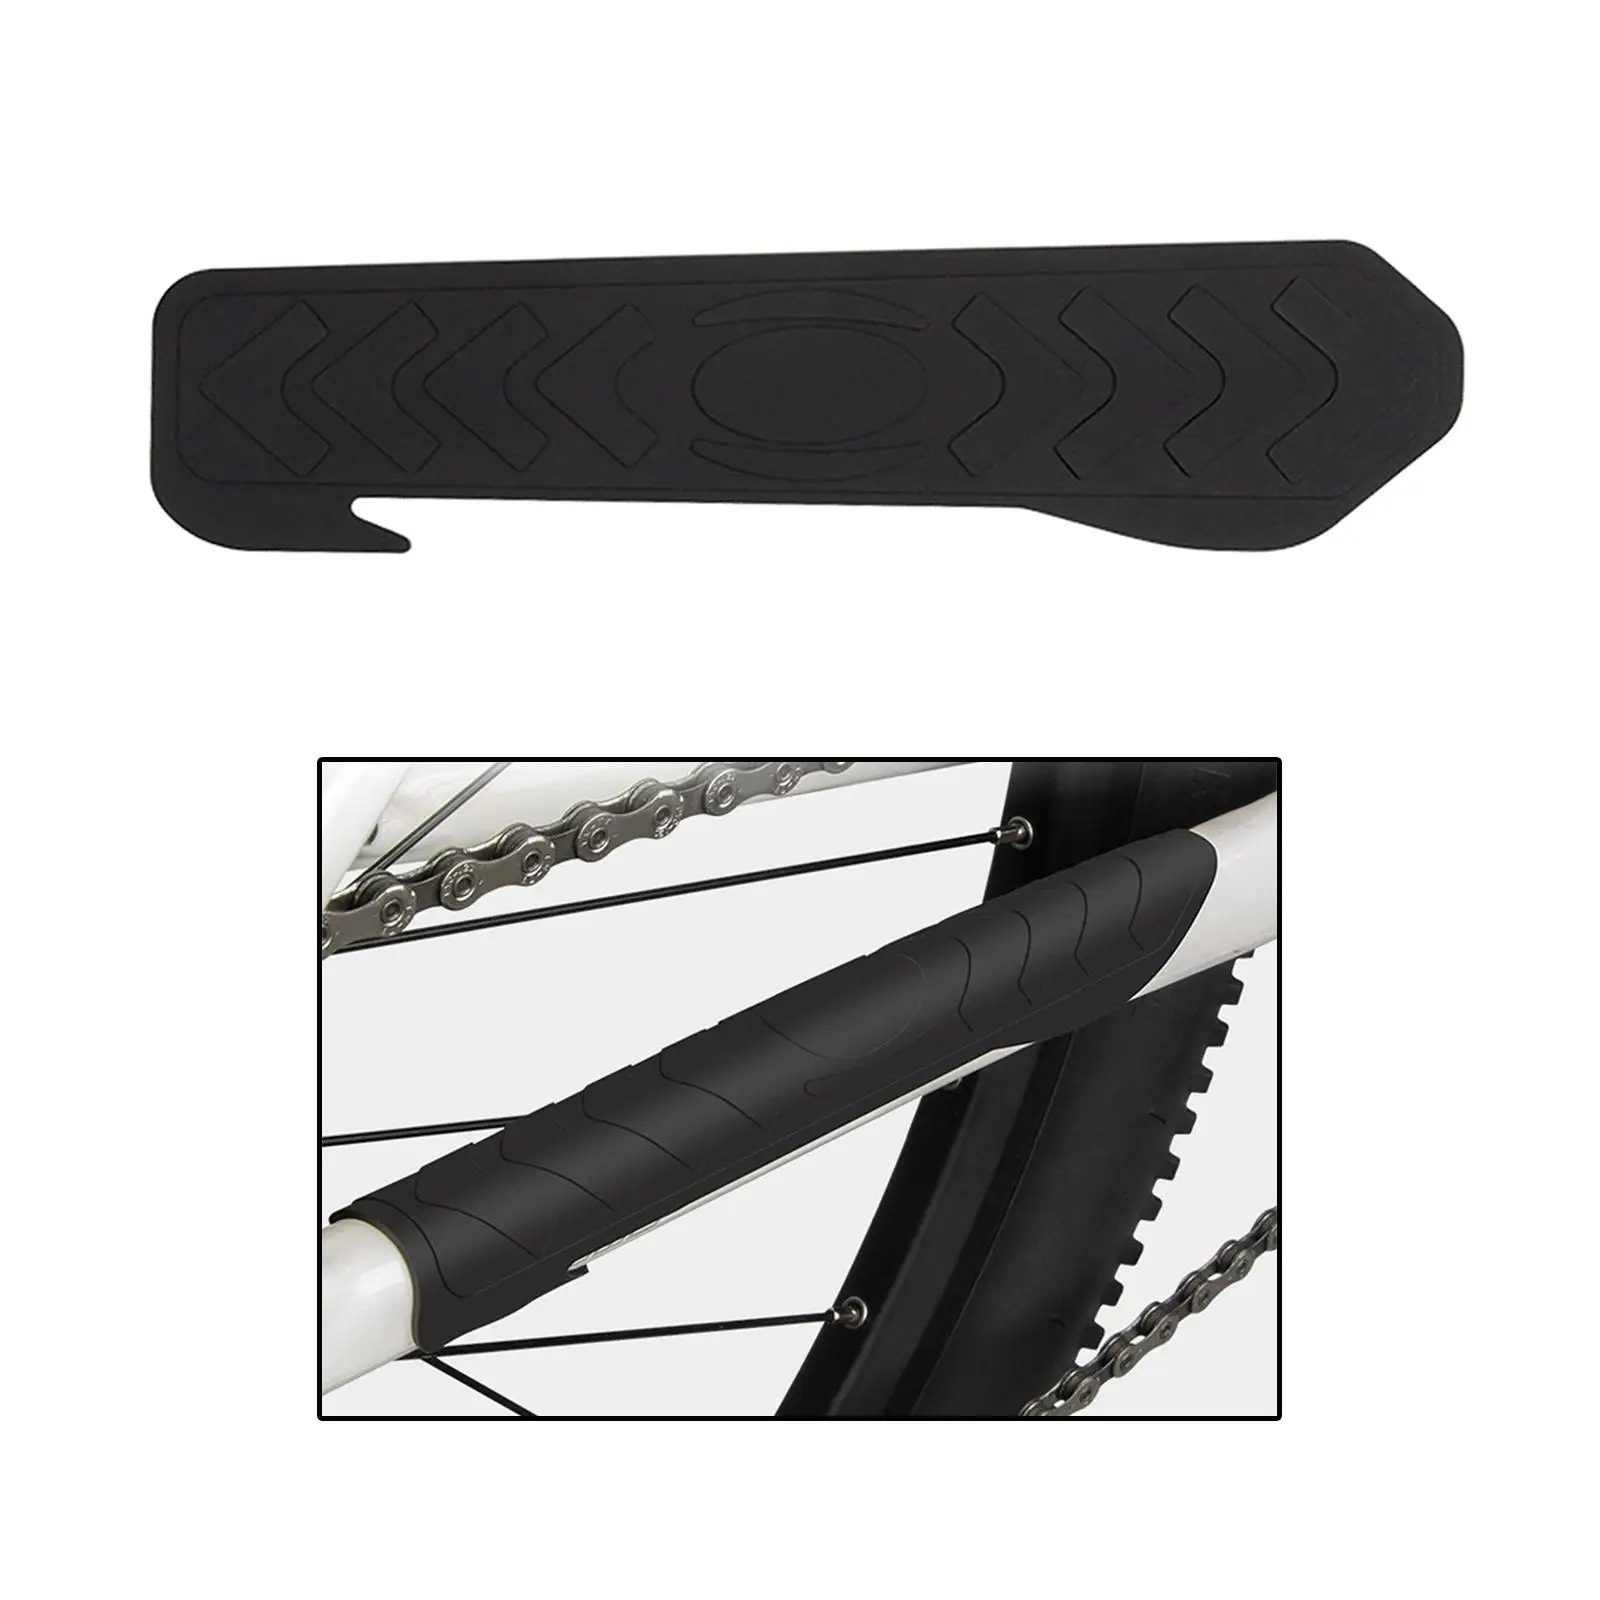 Bike Chainstay Protector, Bicycle Chain Stay Frame Guards, Silicone Protective Chainstay Guard Pad for Mountain Bike